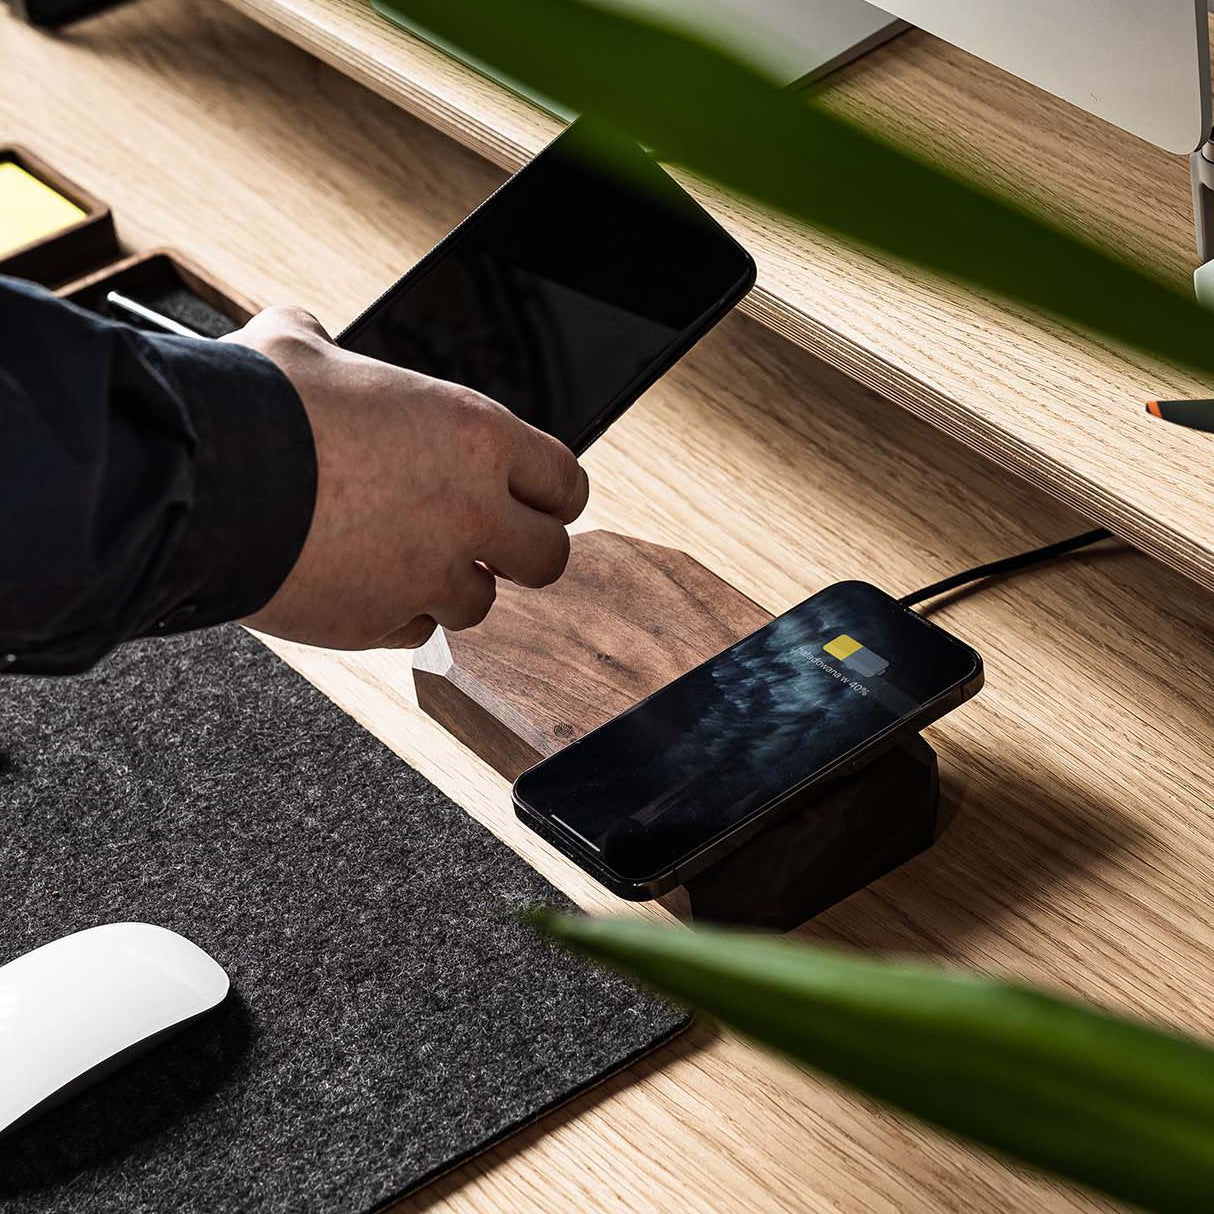 Wireless Phone Charging: A Revolutionary Way to Charge Your Mobile Device